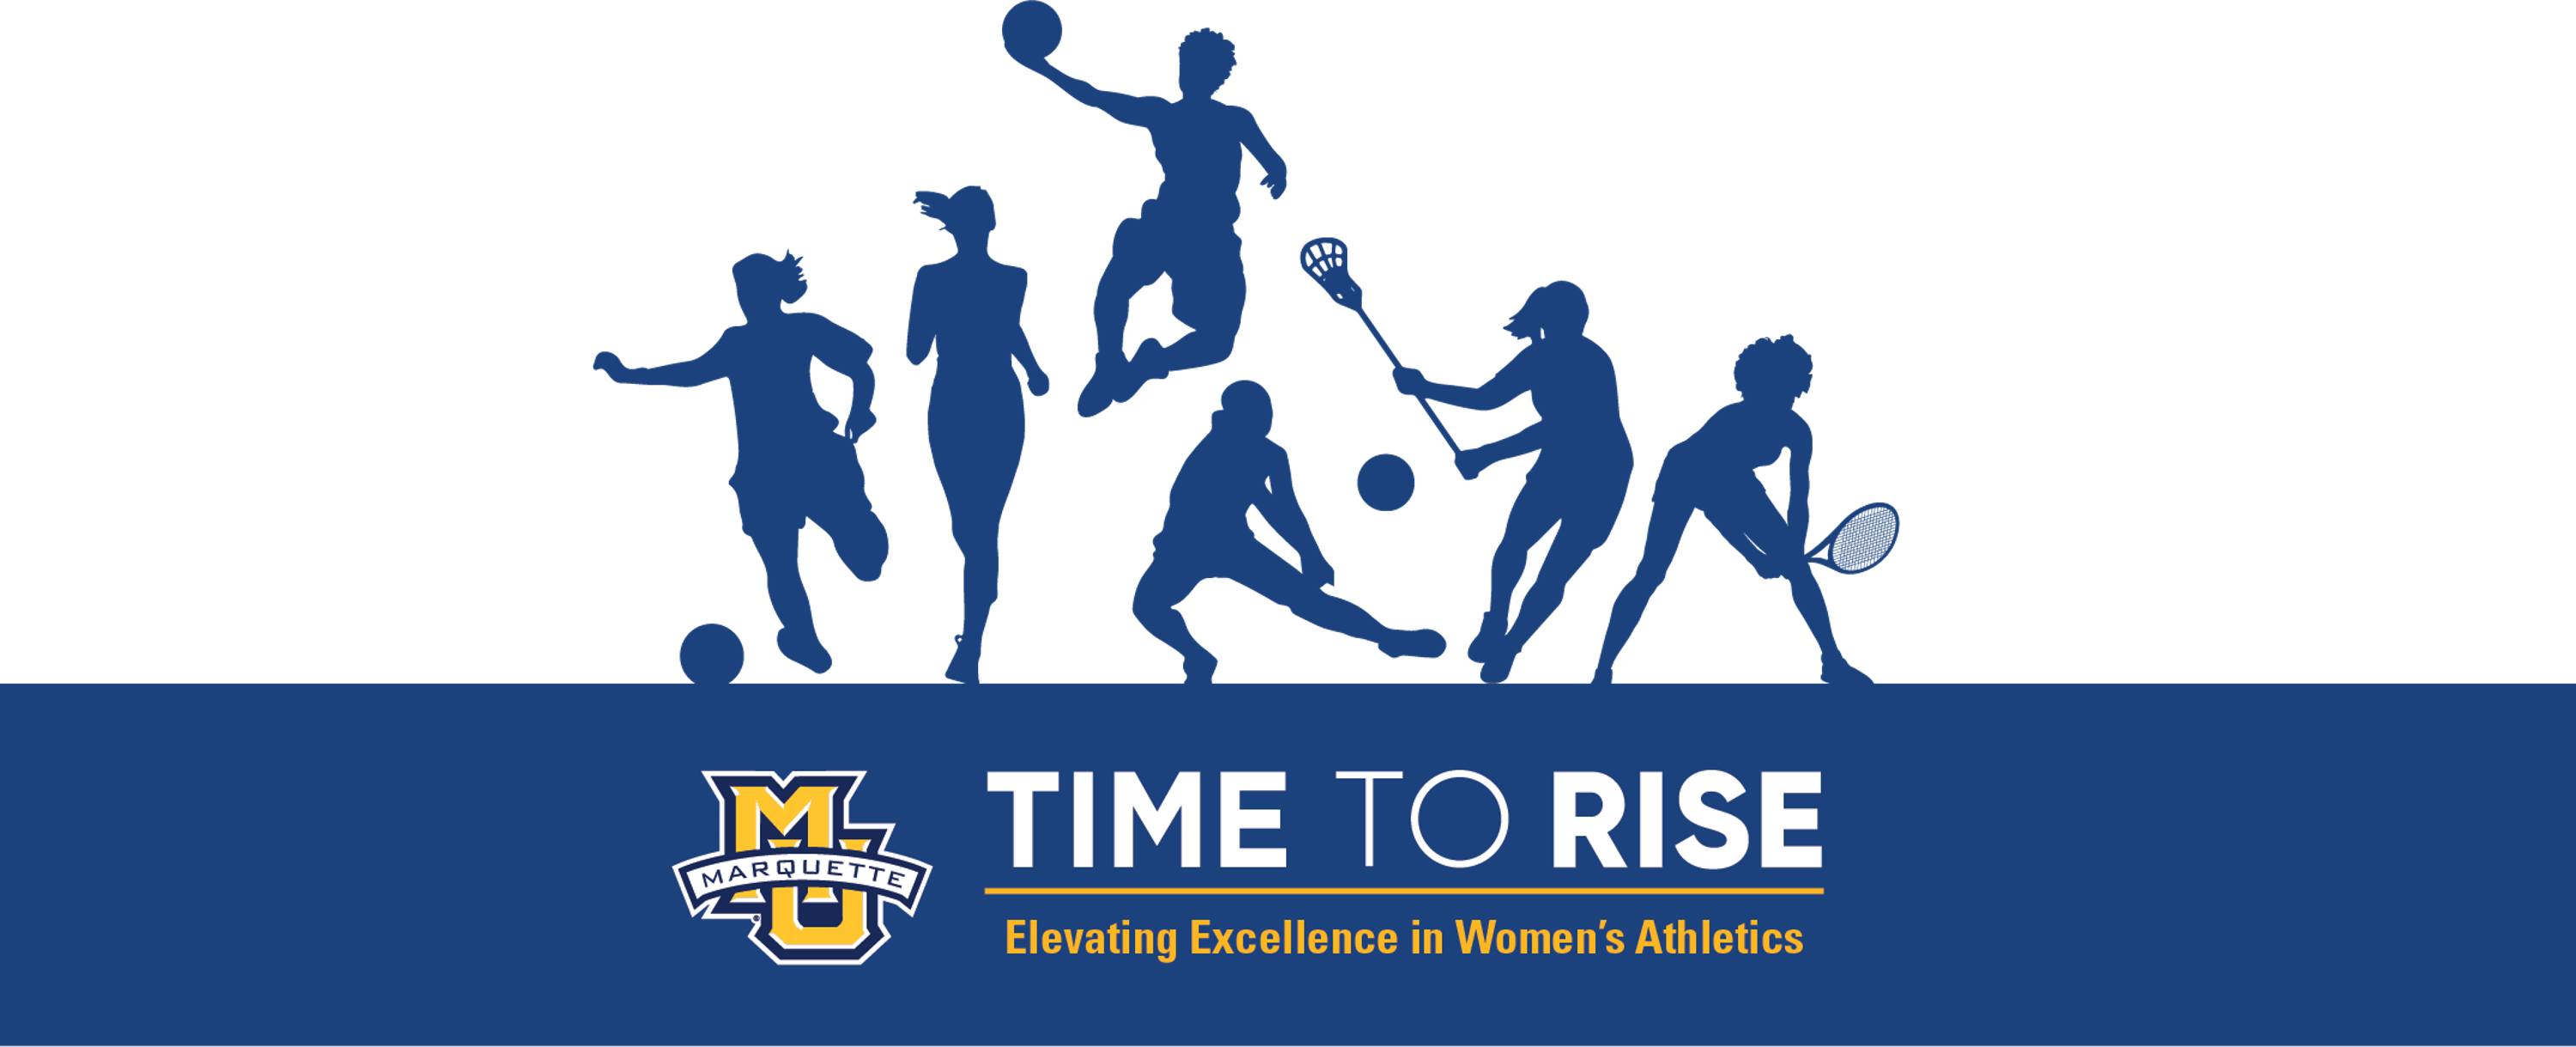 MU Time To Rise Elevating Excellence in Women's Athletics